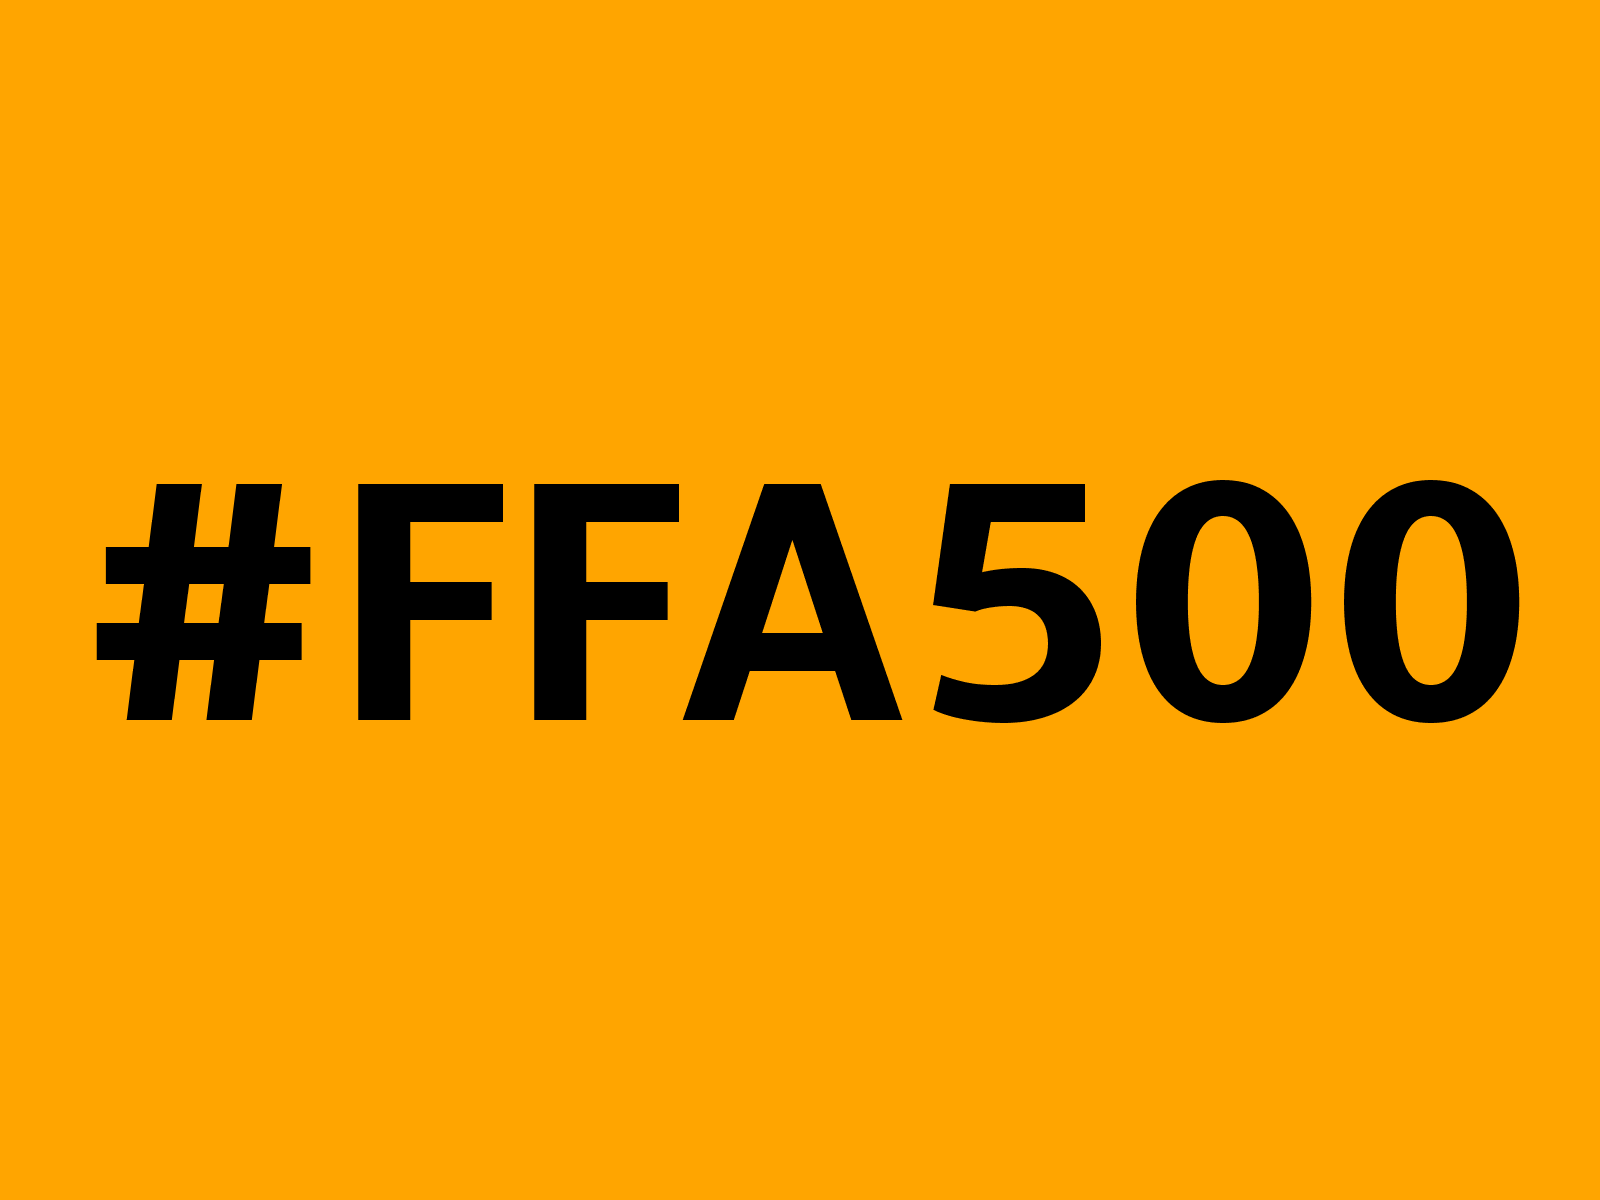 Orange Color - HEX #FFA500 Meaning and Live Previews - PaletteMaker